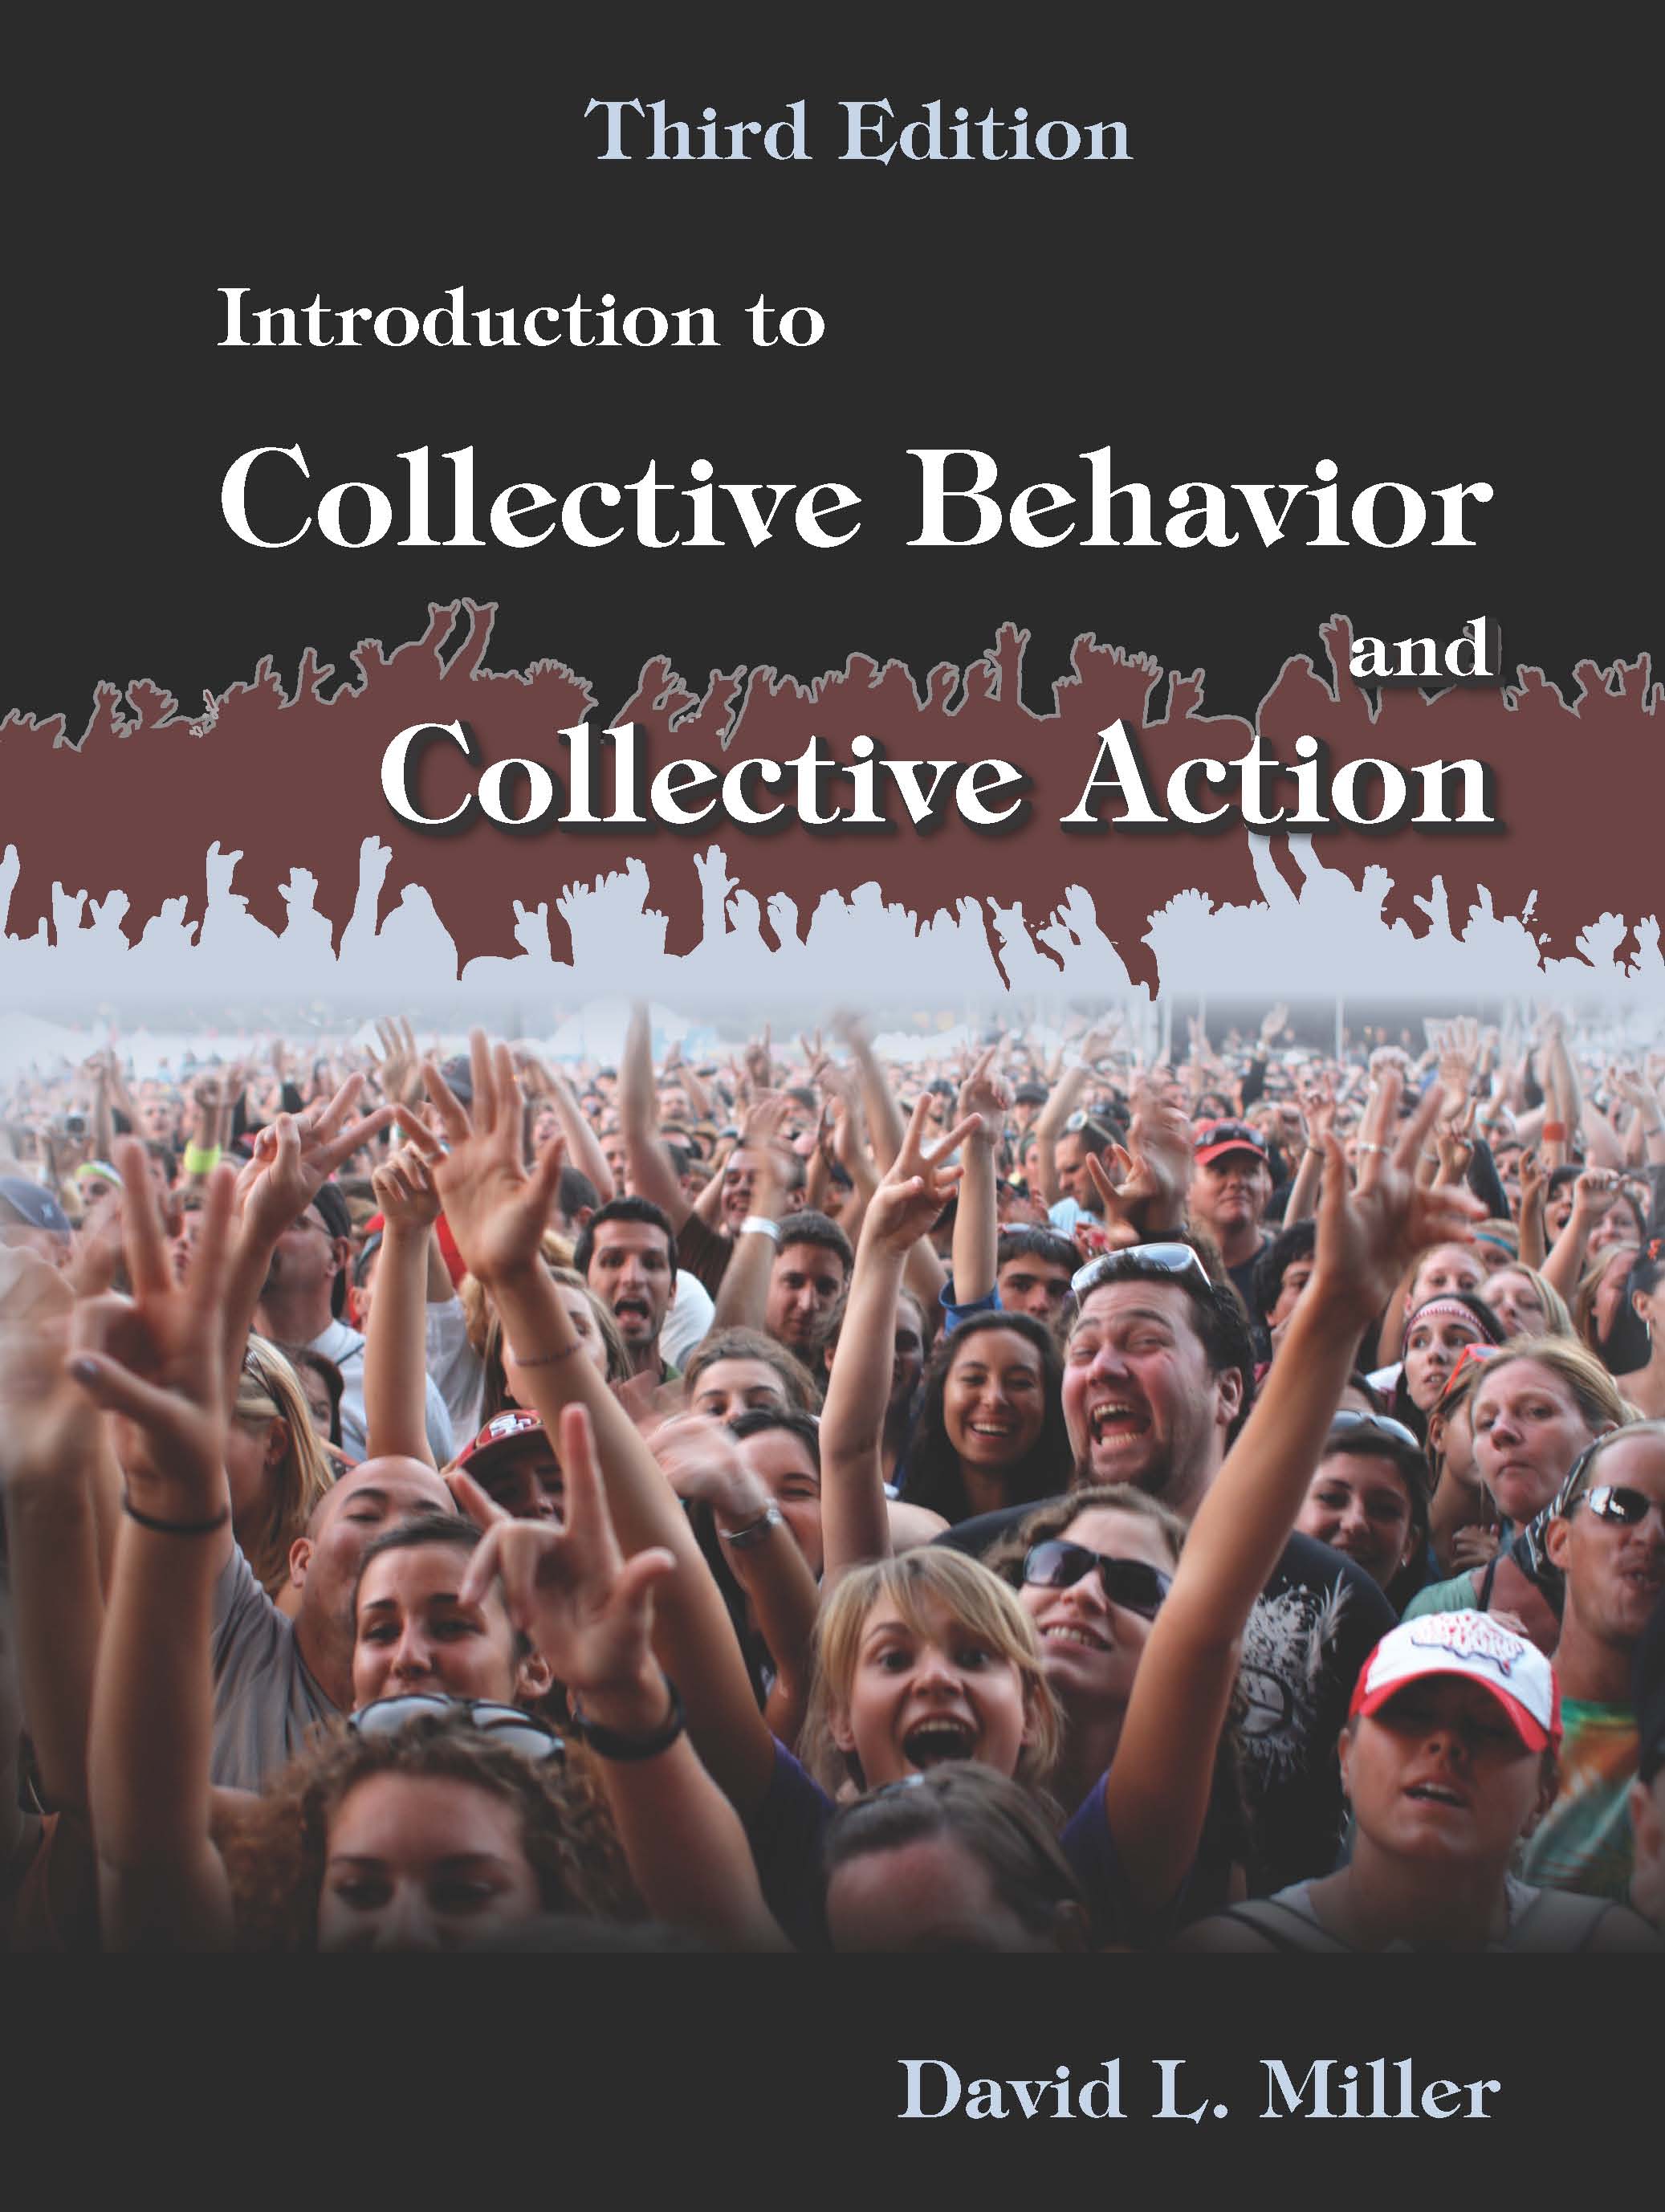 Introduction to Collective Behavior and Collective Action:  by David L. Miller